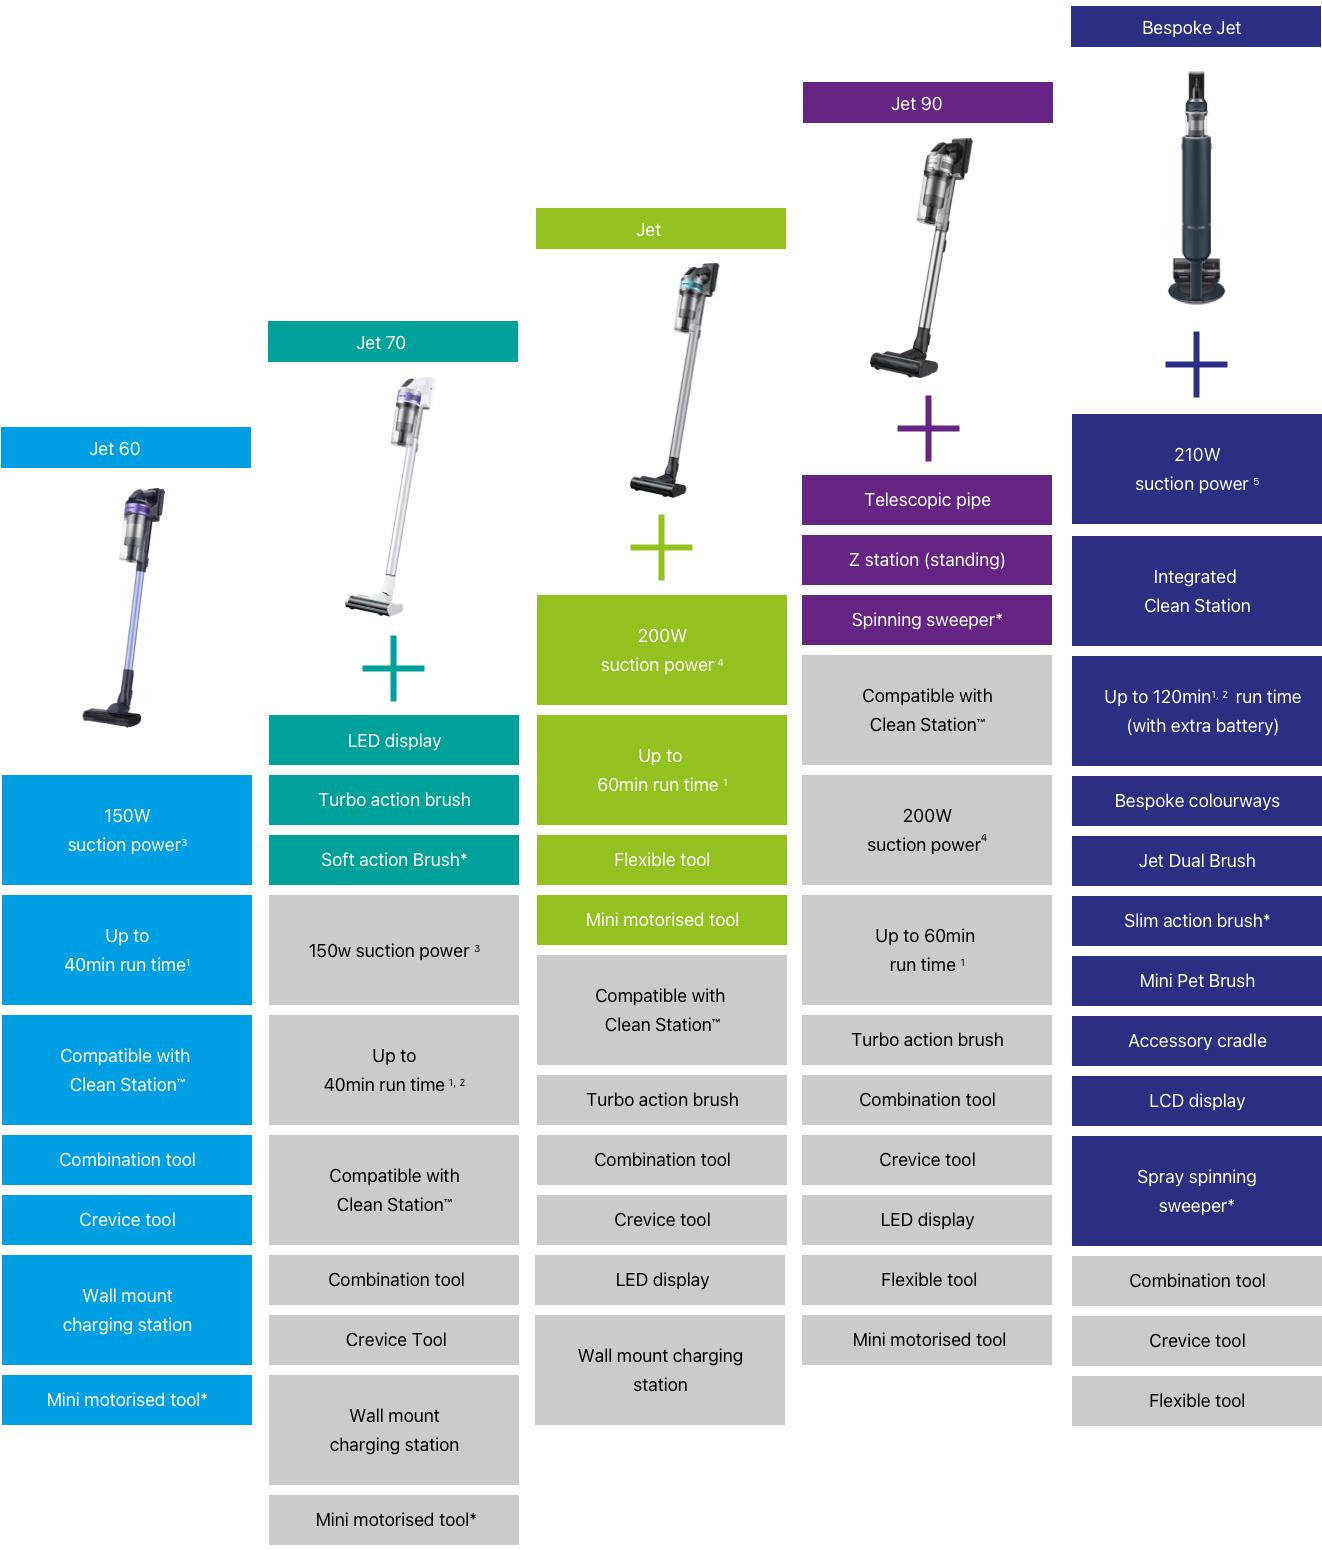 A comparison table for Samsung Jet range vacuum cleaners